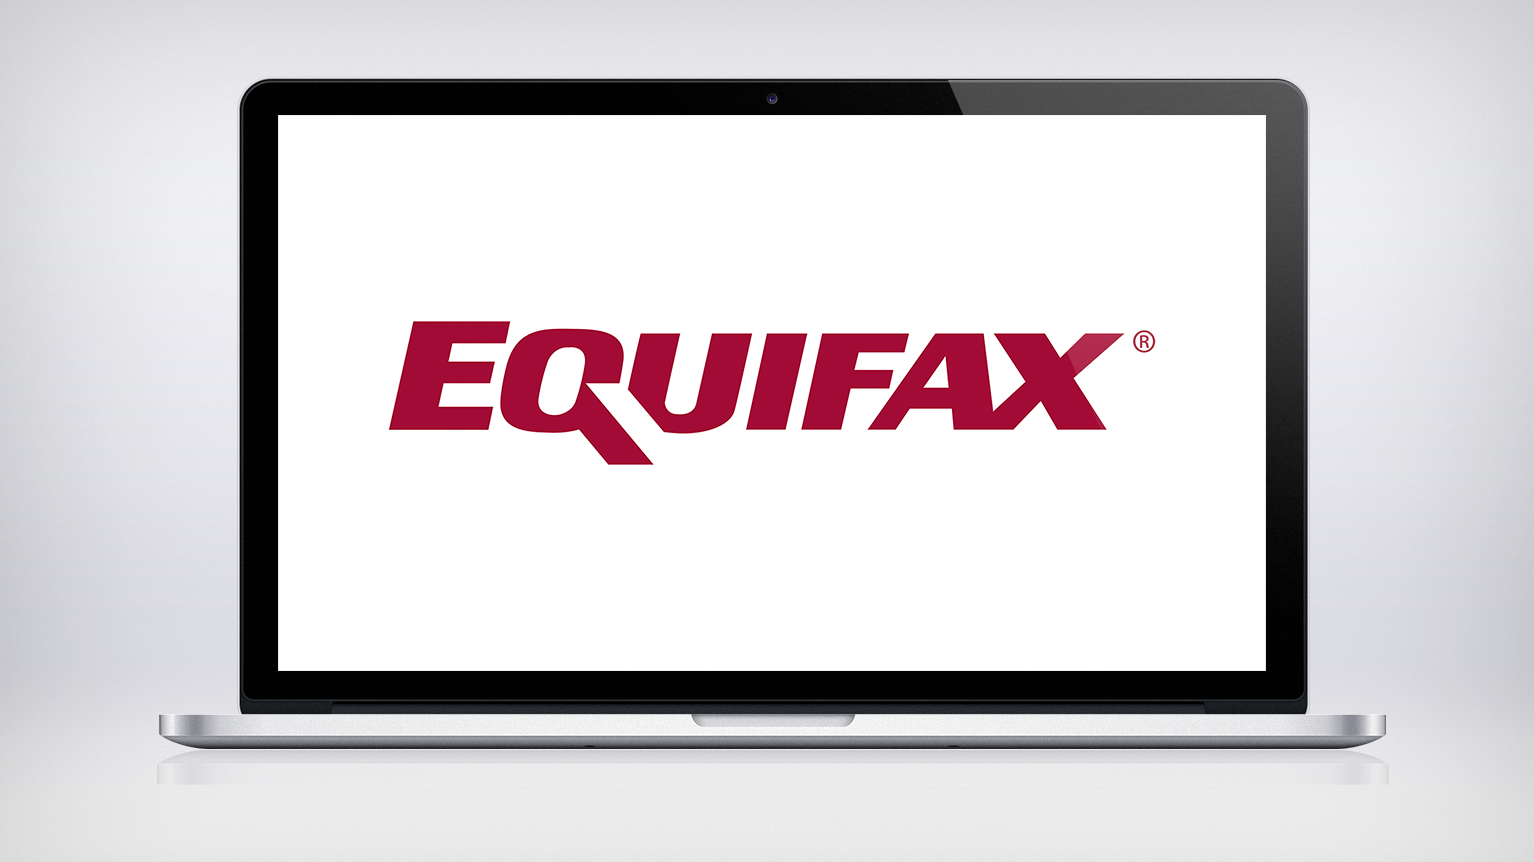 Equifax logo on a laptop screen